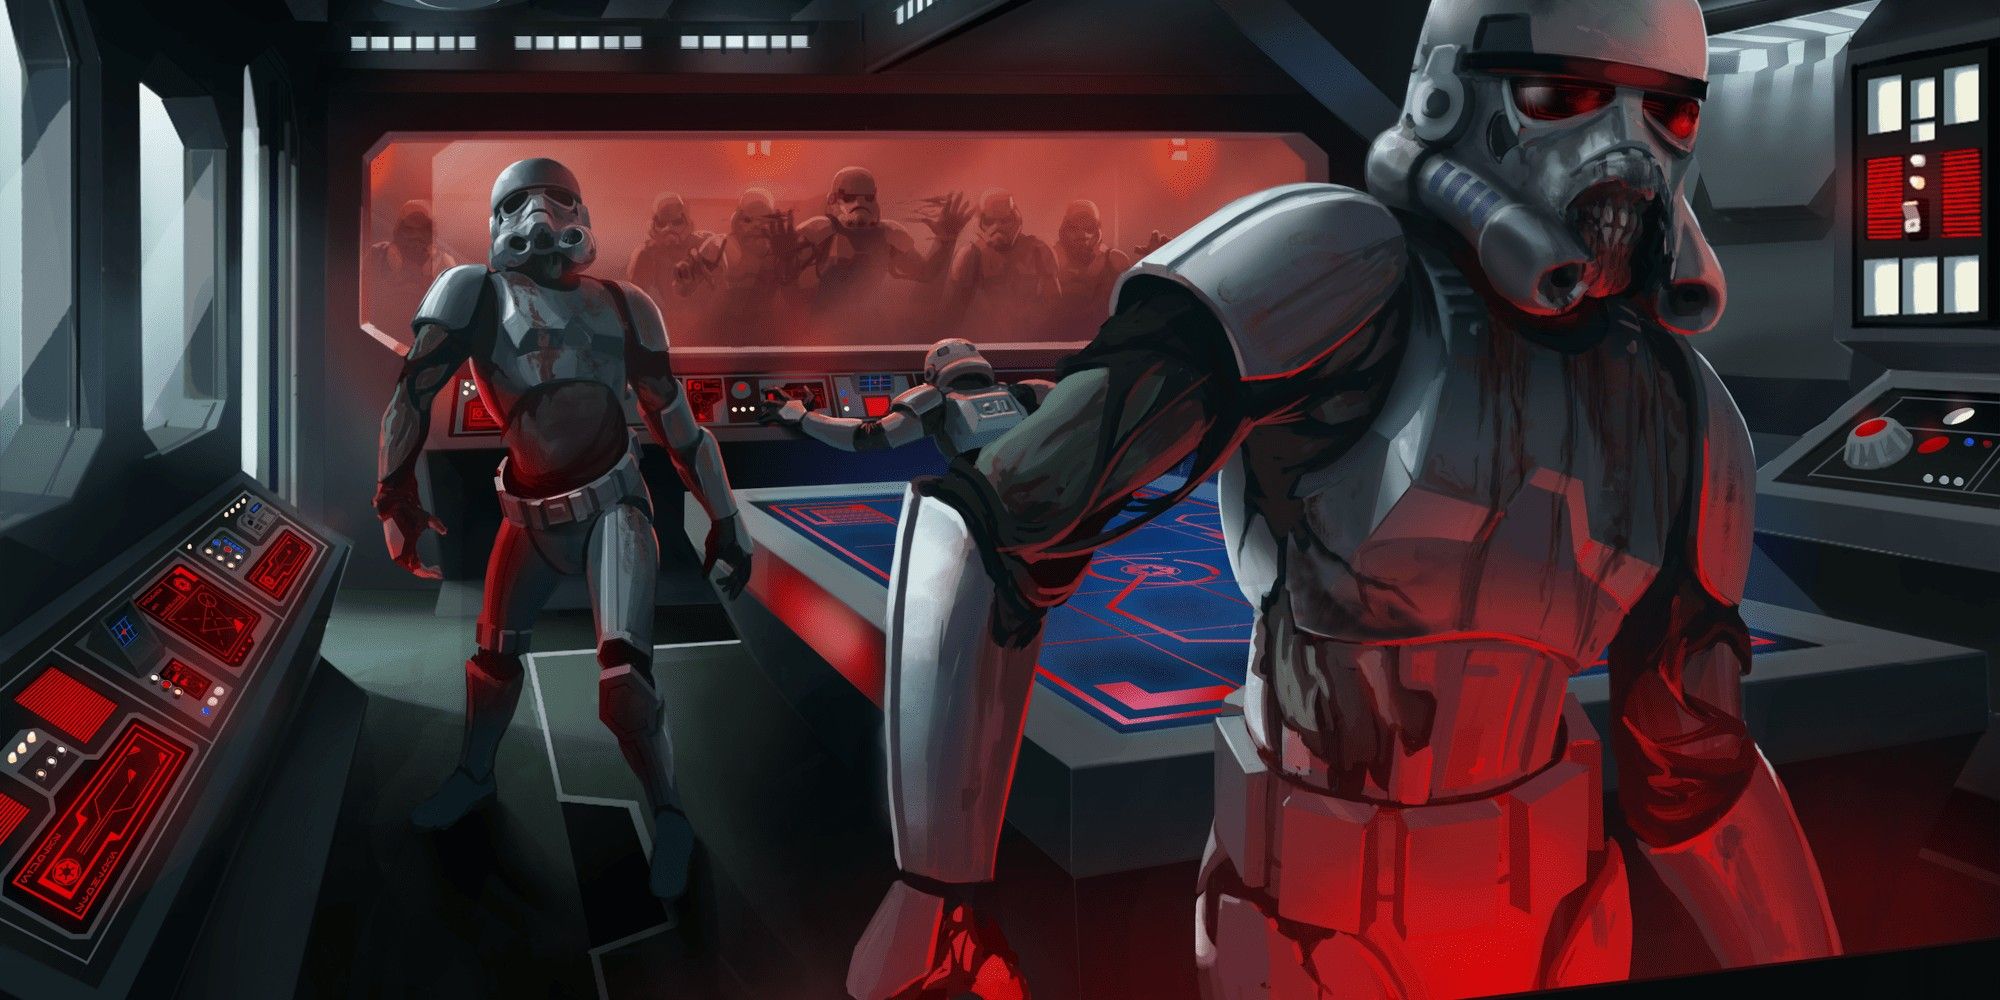 Zombie Storm Troopers in the novel Death Troopers